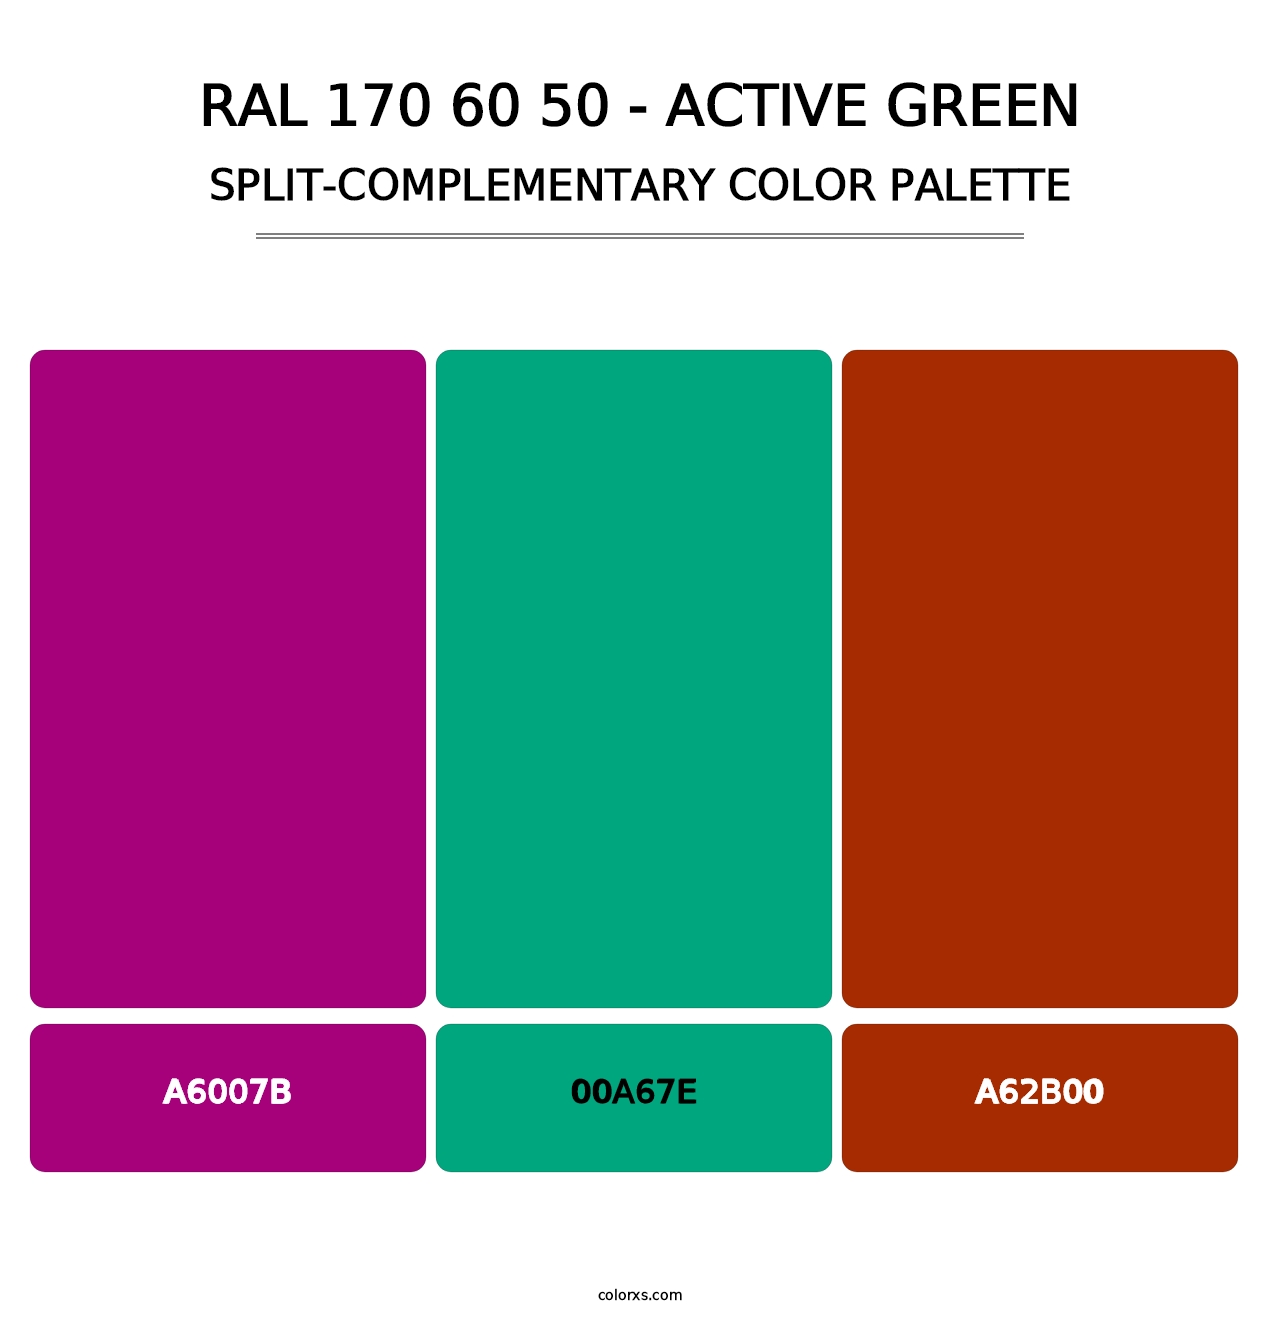 RAL 170 60 50 - Active Green - Split-Complementary Color Palette